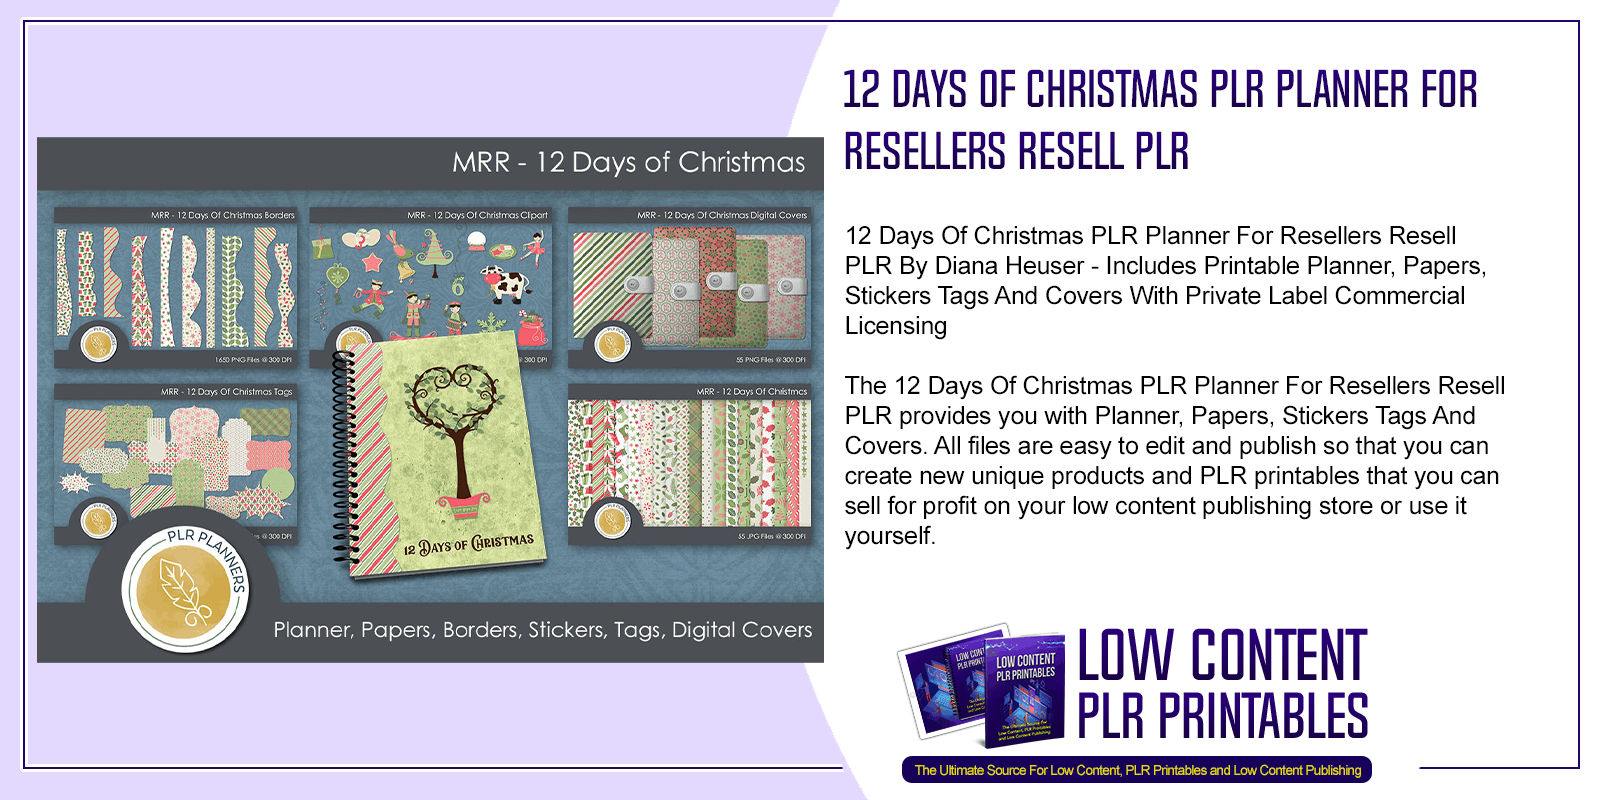 12 Days Of Christmas PLR Planner For Resellers Resell PLR 1